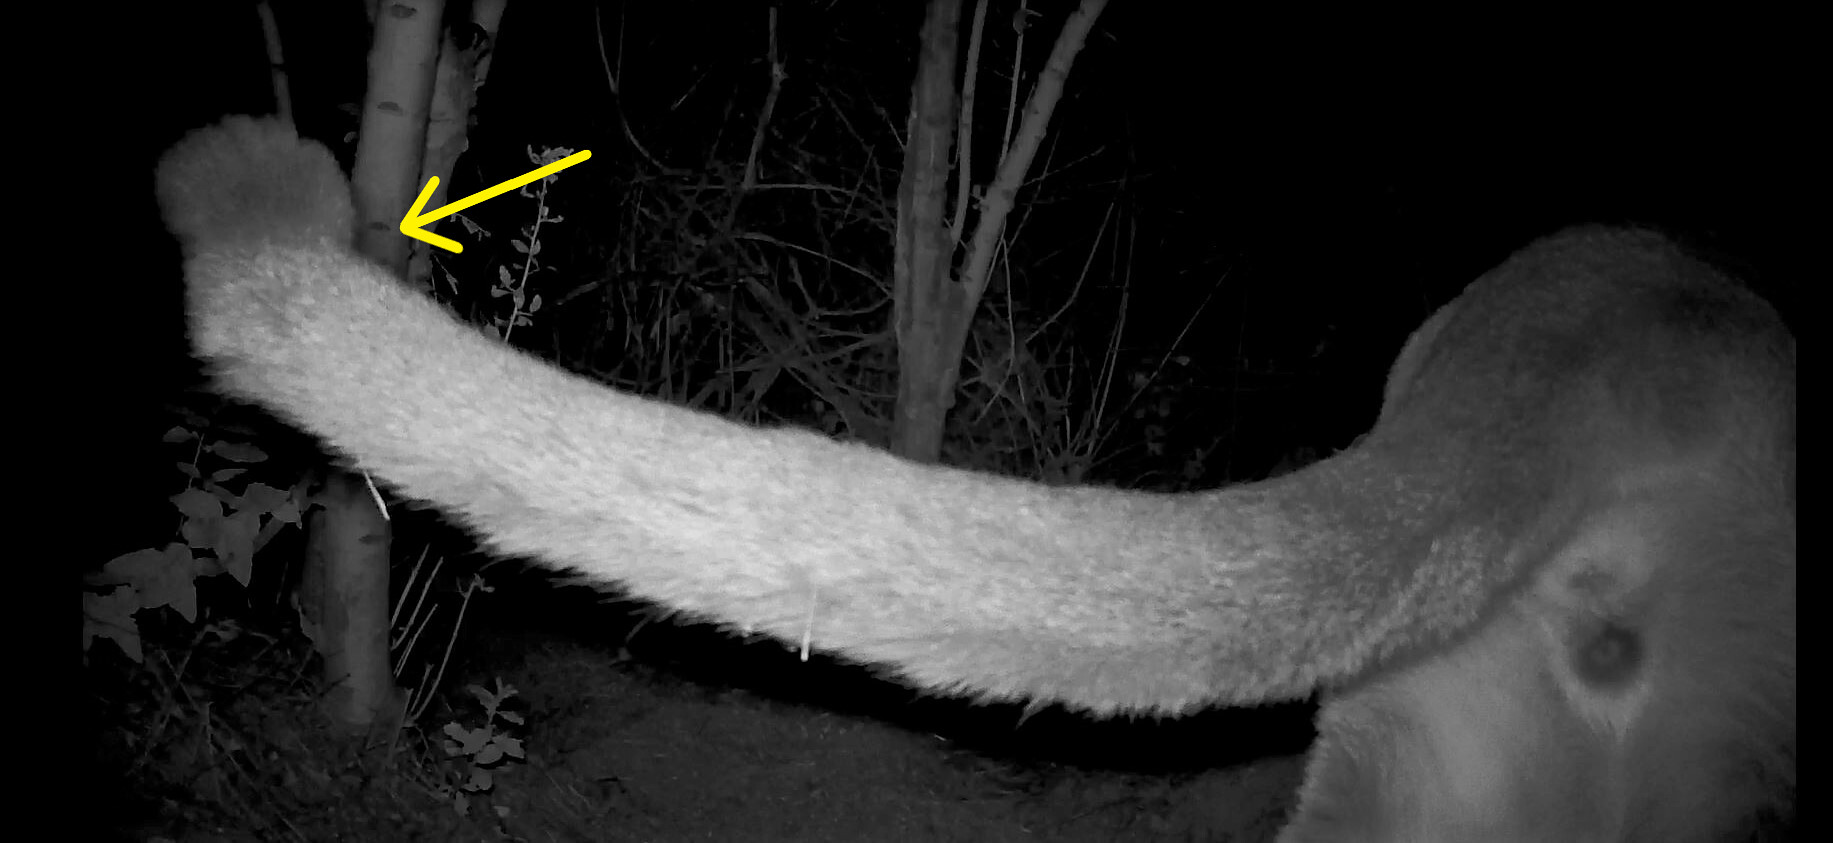 Not a good sign: a kinked tail is evidence of inbreeding and a lack of genetic diversity among cougars.  (Image: National Park Service)